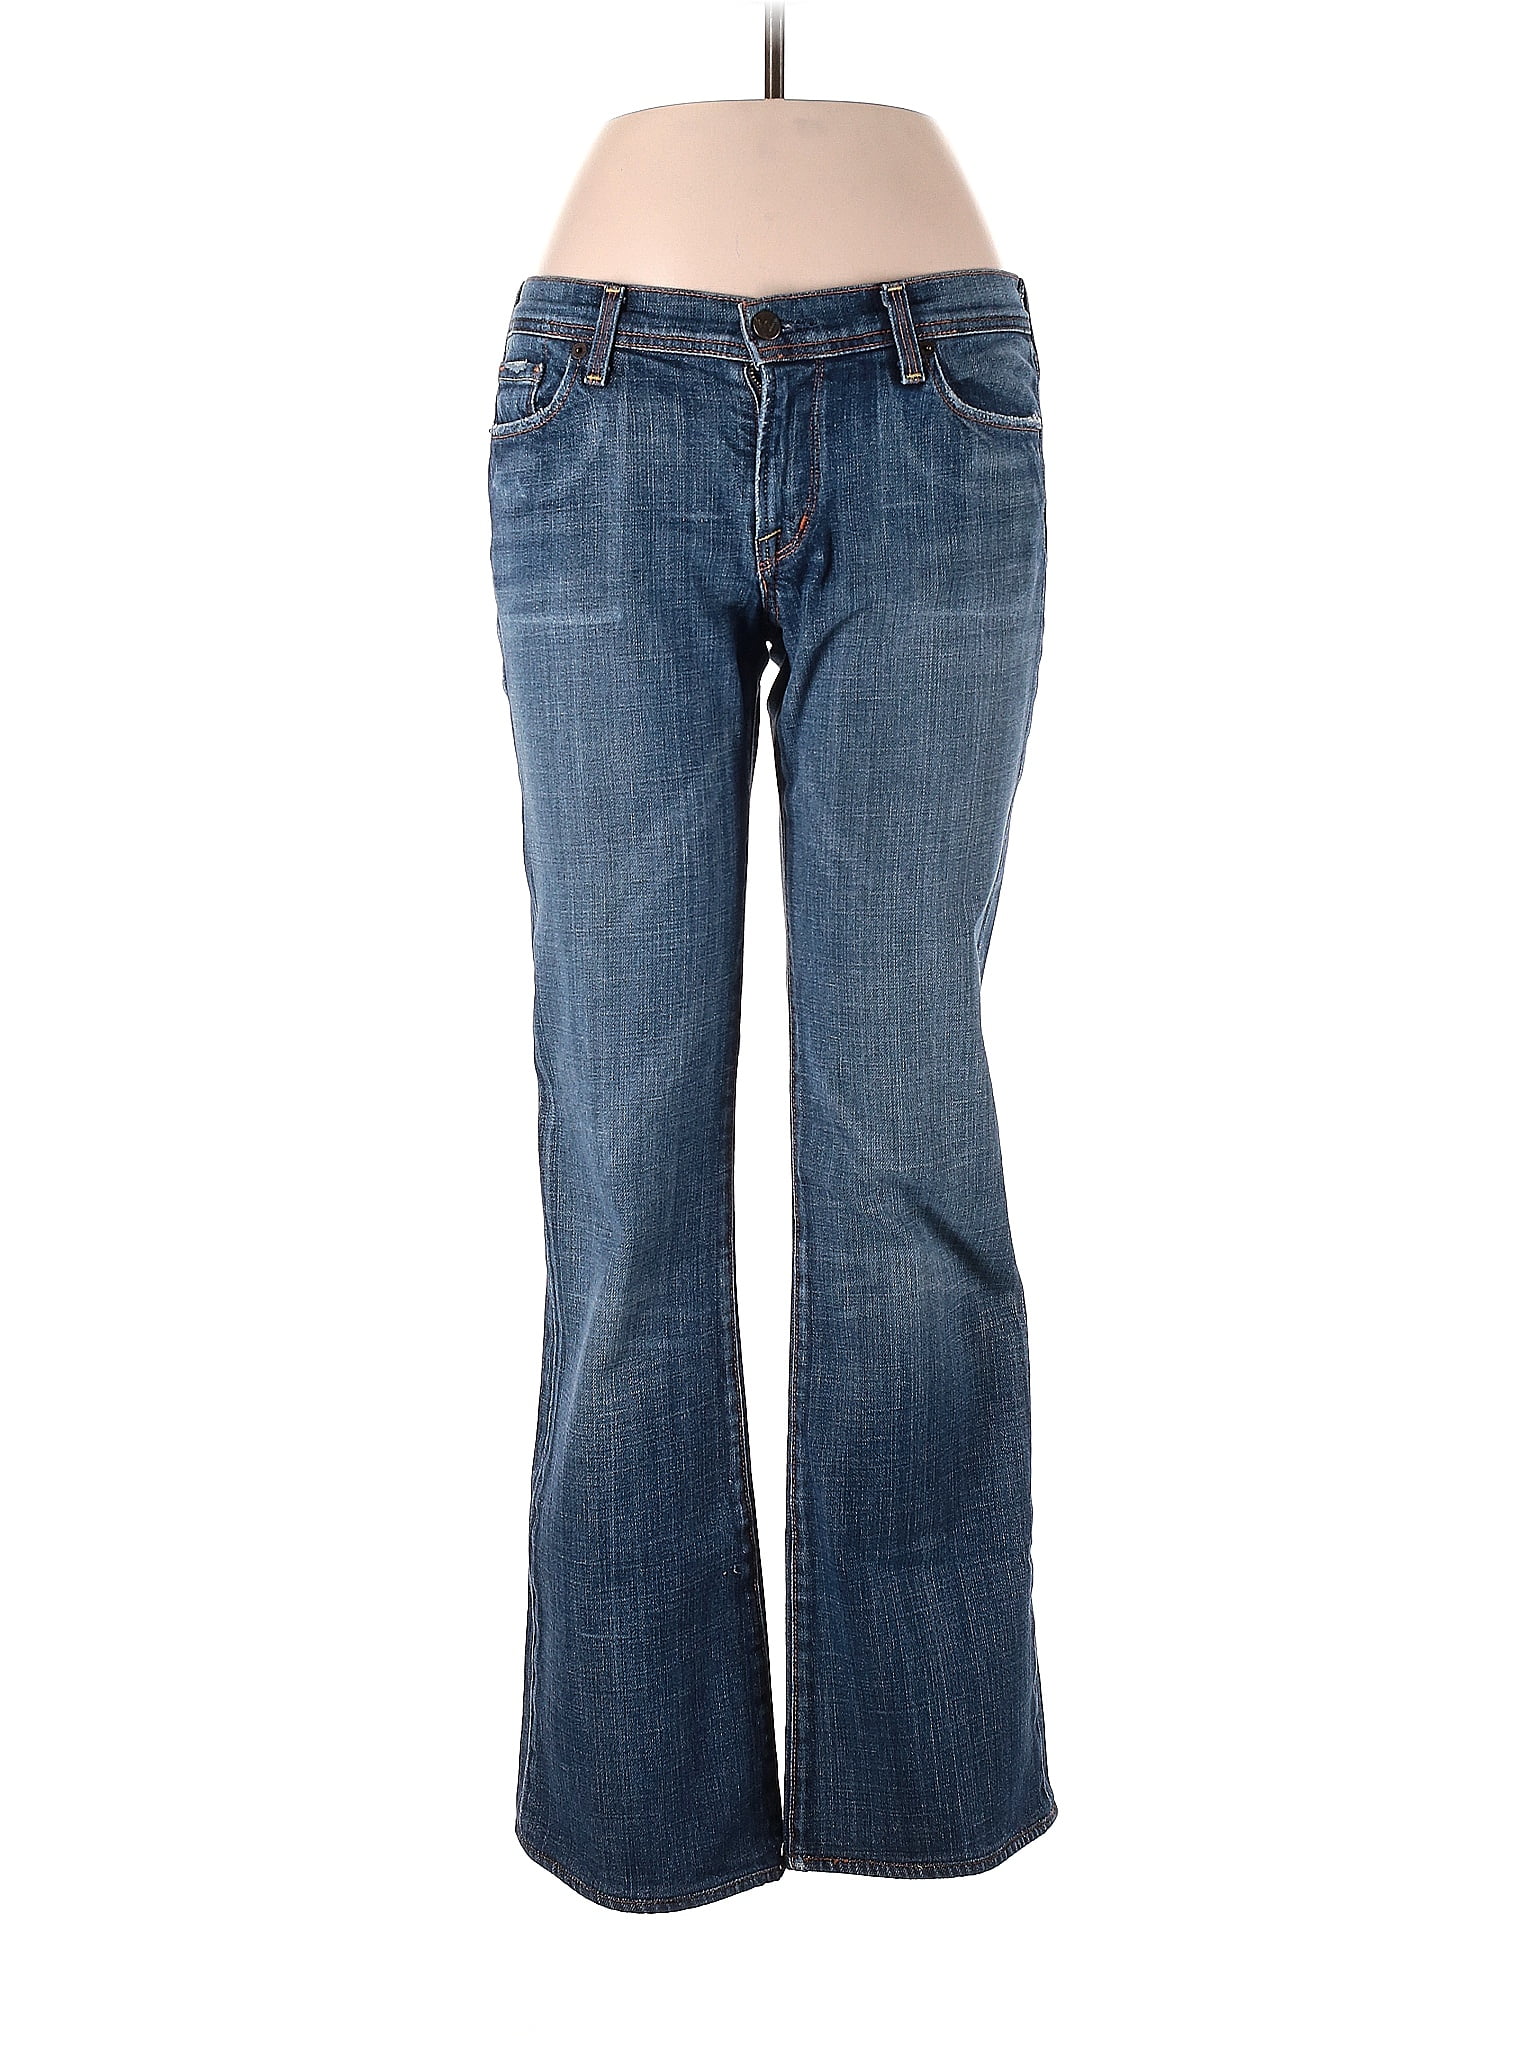 Citizens of Humanity Blue Jeans 31 Waist - 83% off | thredUP